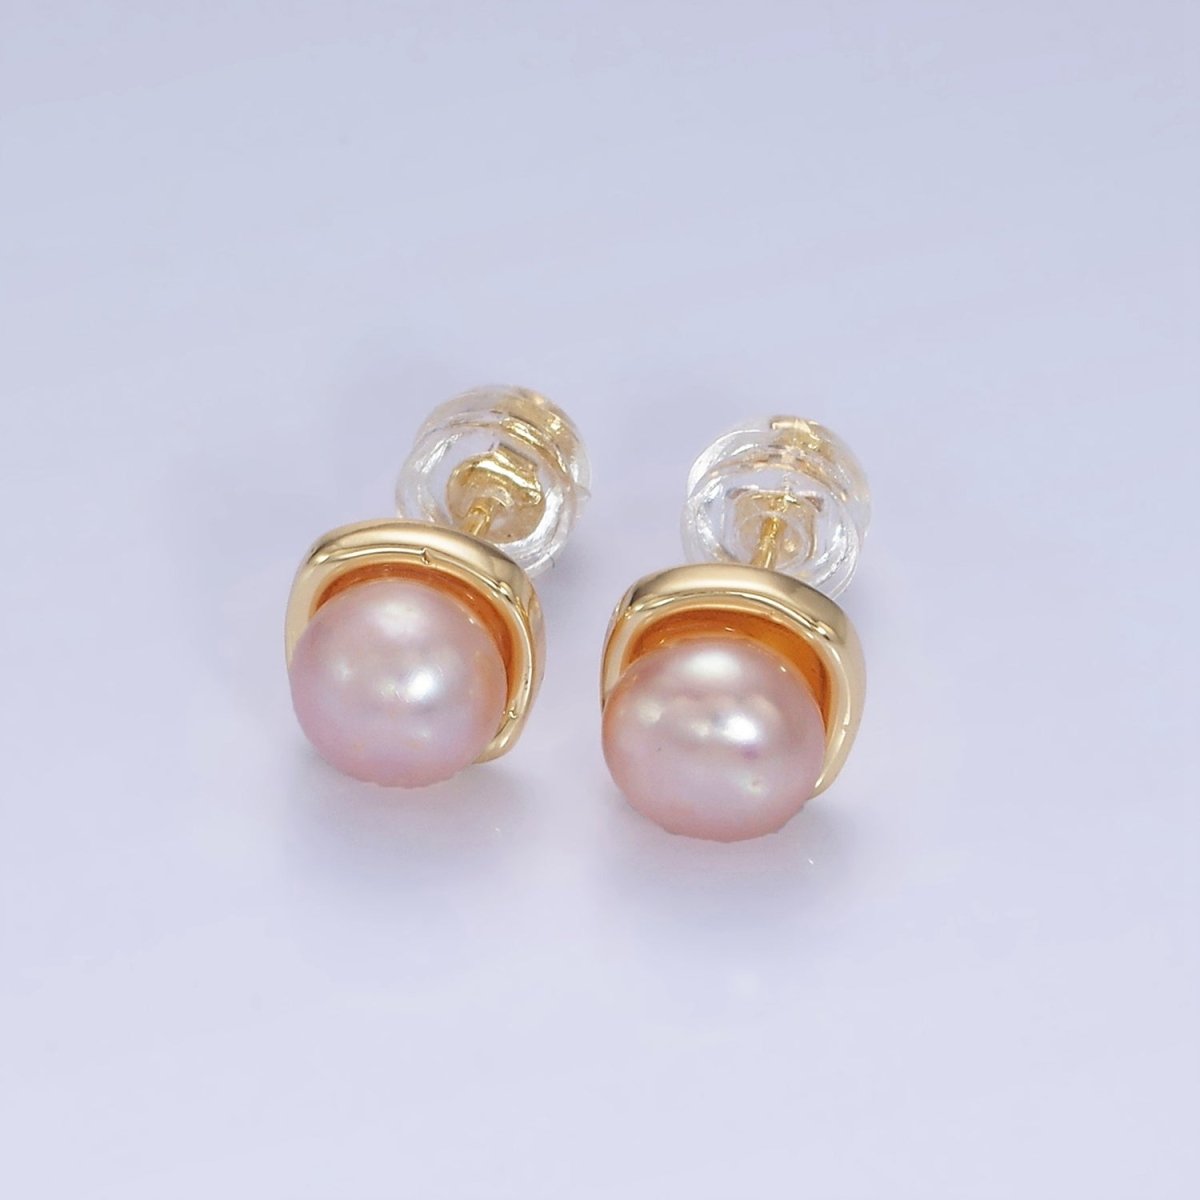 14K Gold Filled White, Pink, Purple Pearl Stud Earrings in Gold & Silver | AB1248 - AB1251 - DLUXCA